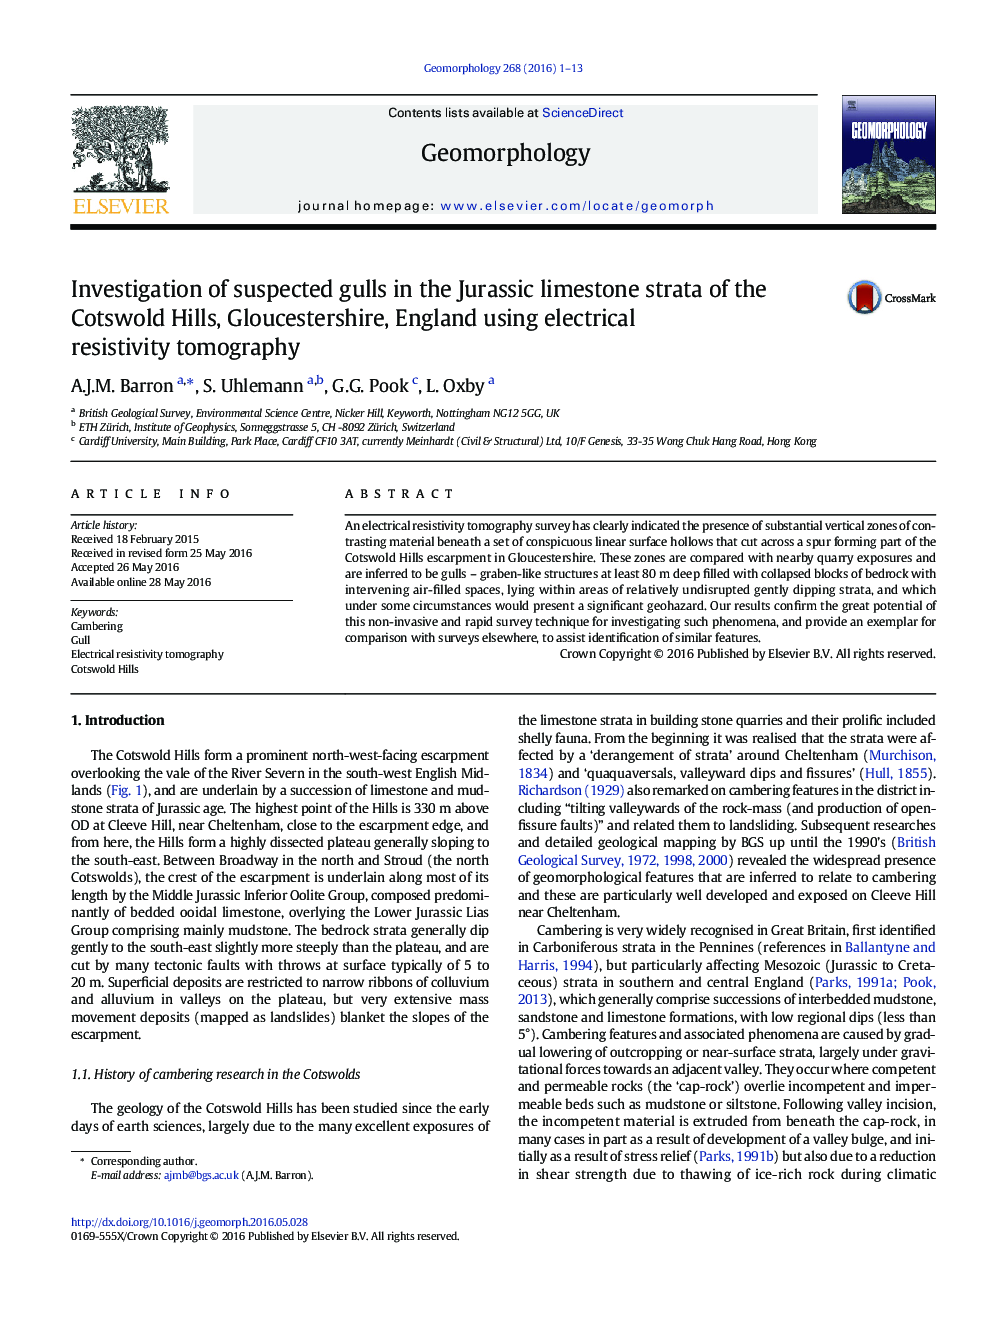 Investigation of suspected gulls in the Jurassic limestone strata of the Cotswold Hills, Gloucestershire, England using electrical resistivity tomography